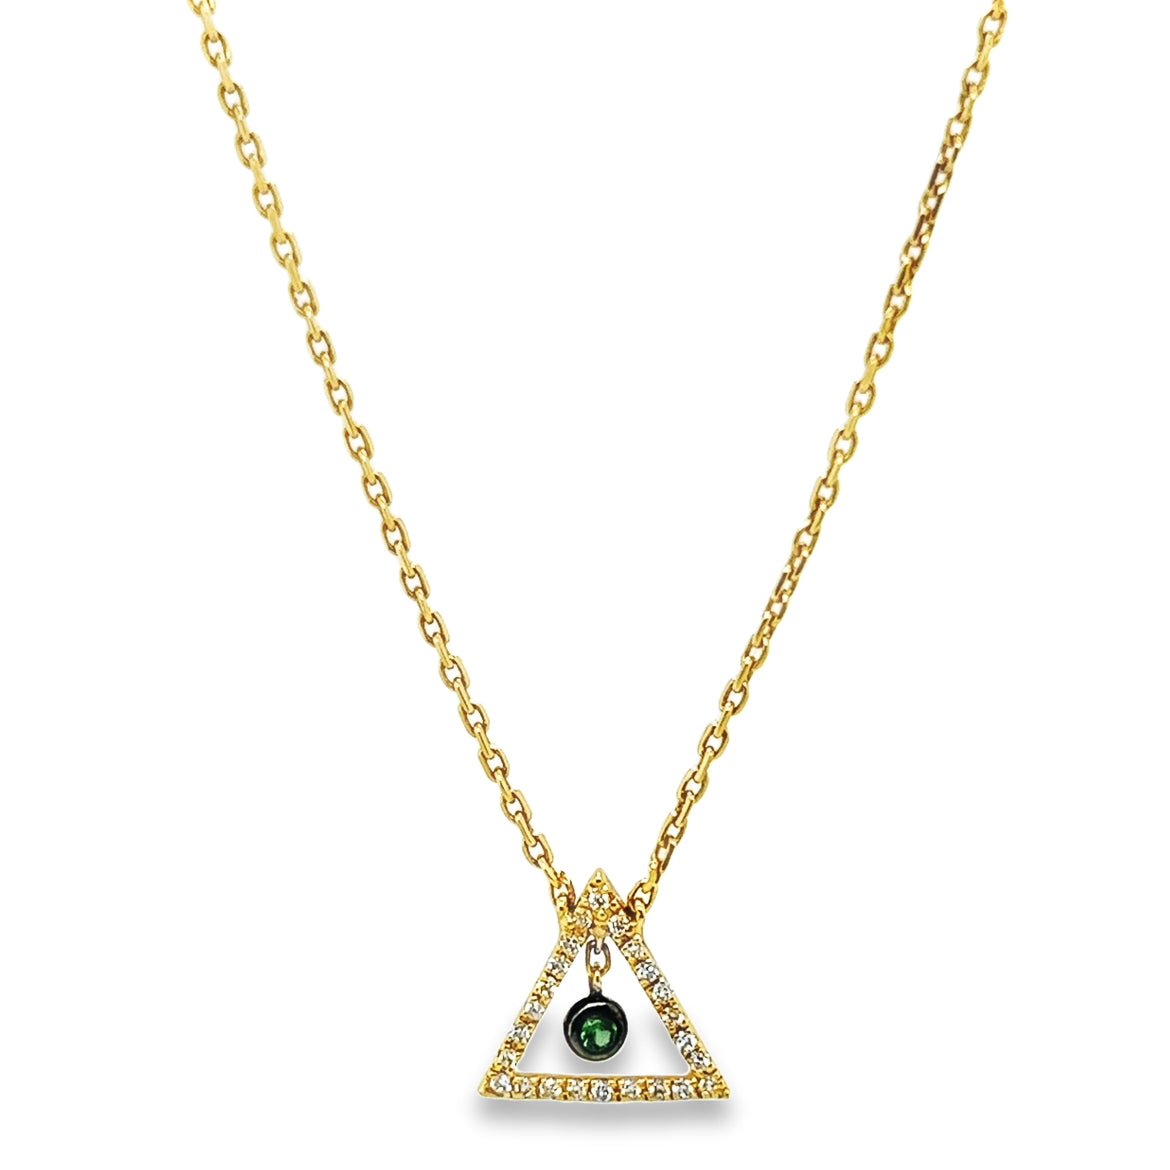 Dangling Diamond Triangle Necklace in 18K Yellow gold - BFZ04